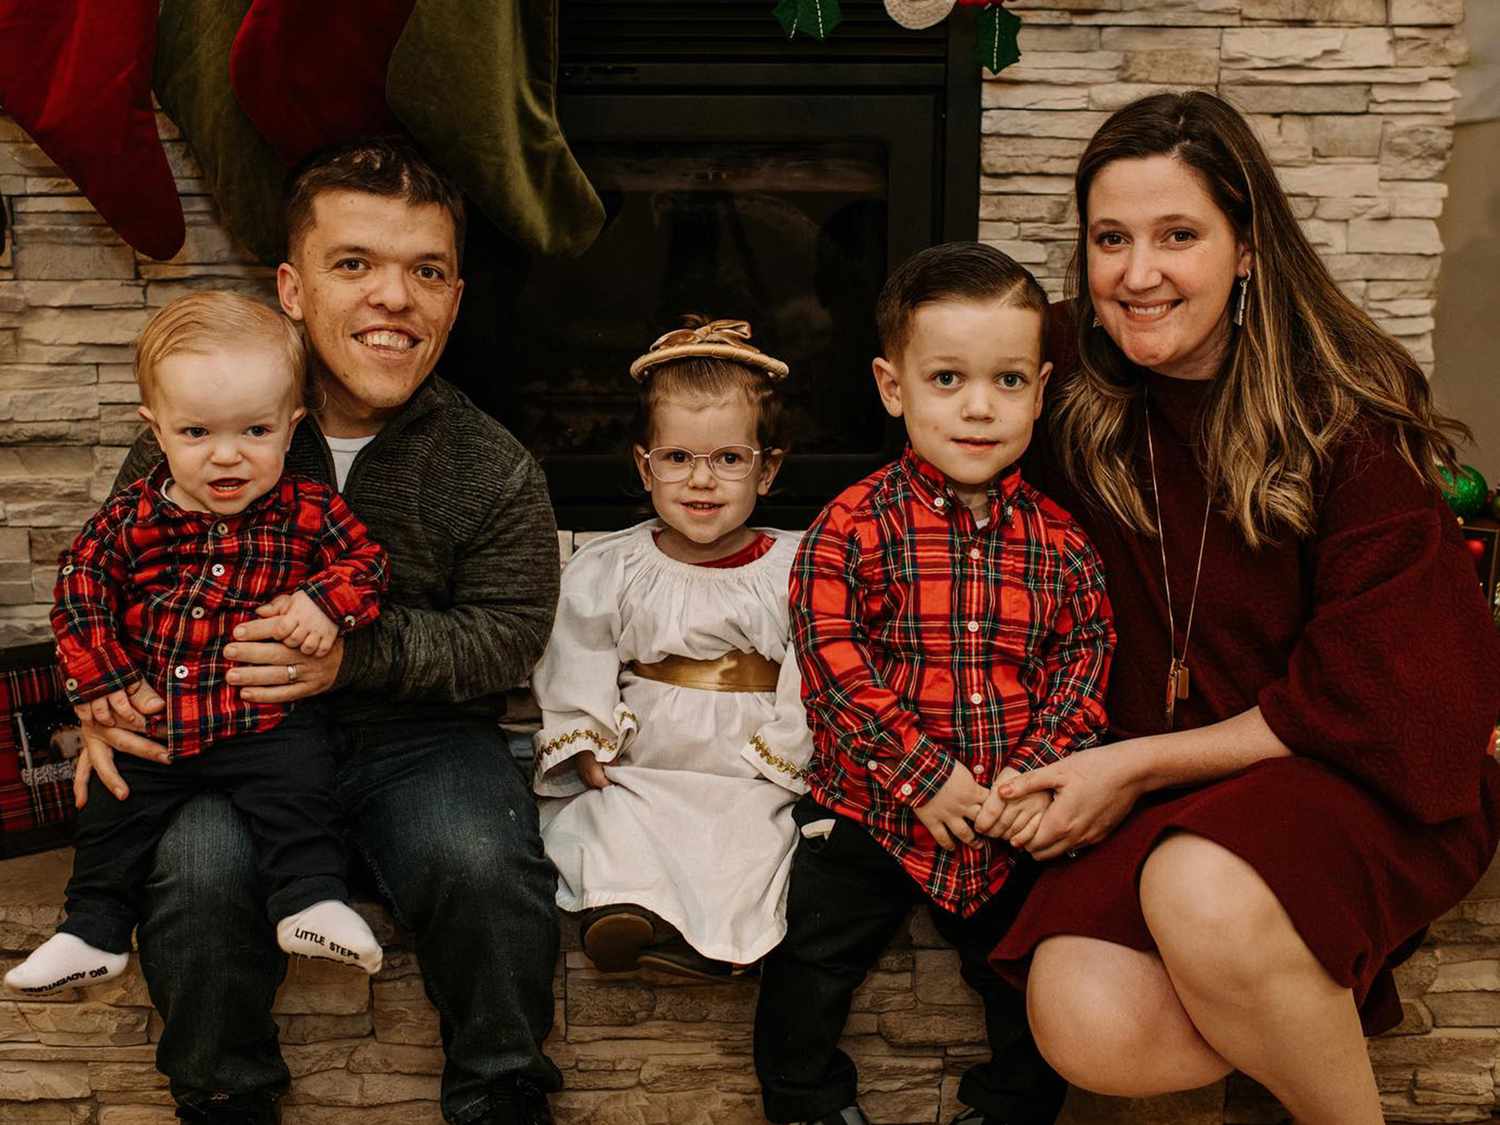 LPBW's Tori Roloff Admits She Feels 'Nervous' About Daughter's Upcoming Surgery to Treat 'Severe' Sleep Apnea